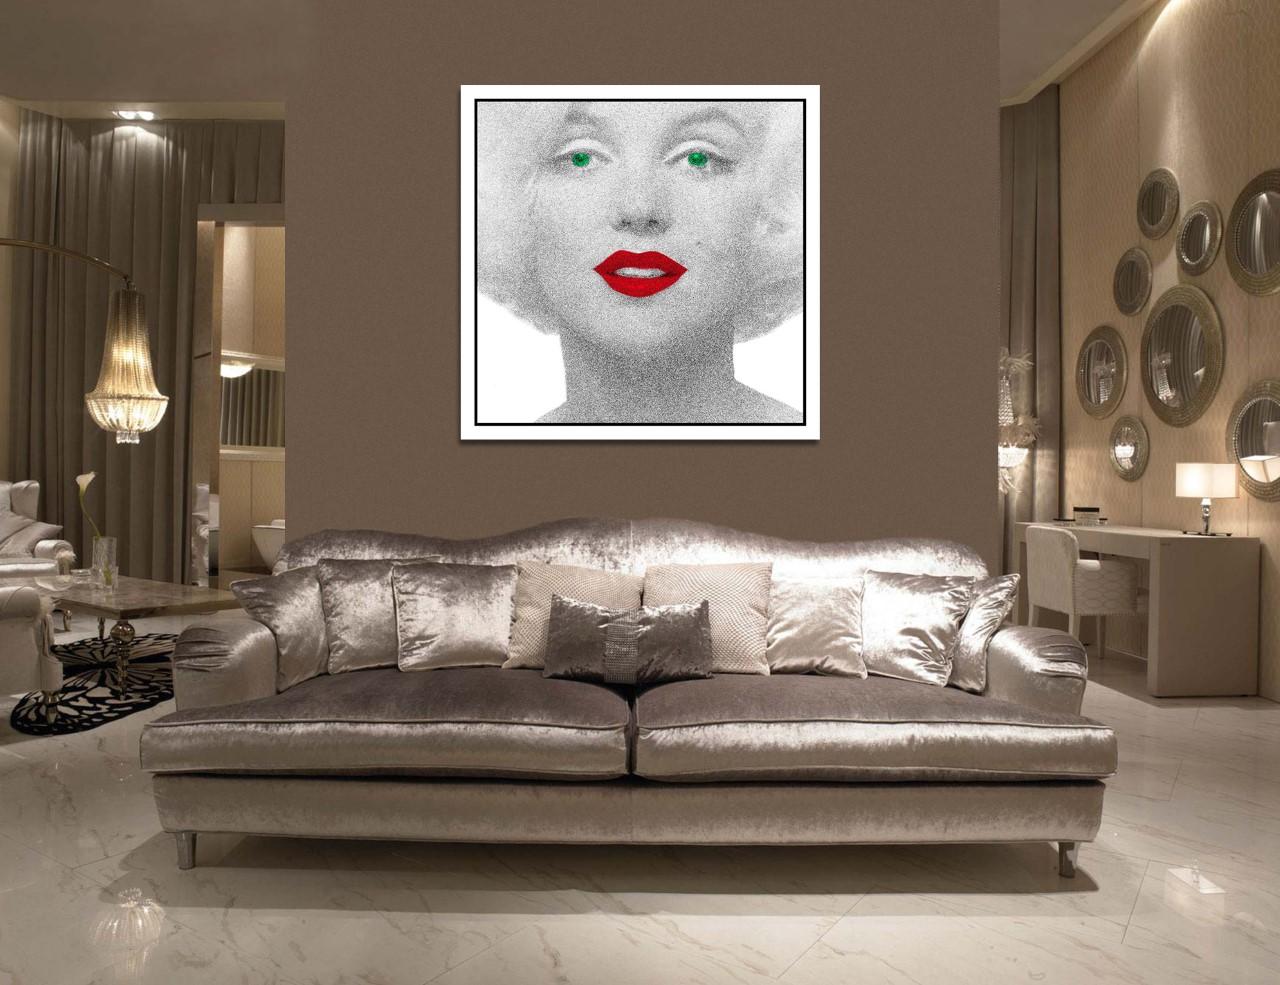 Celebrating the one and only Marilyn Monroe in this unique series by Mauro Oliveira. 

Limited edition of 30 museum quality Giclee prints on CANVAS, signed and numbered by the artist. Print lead time 1 week. 

A 